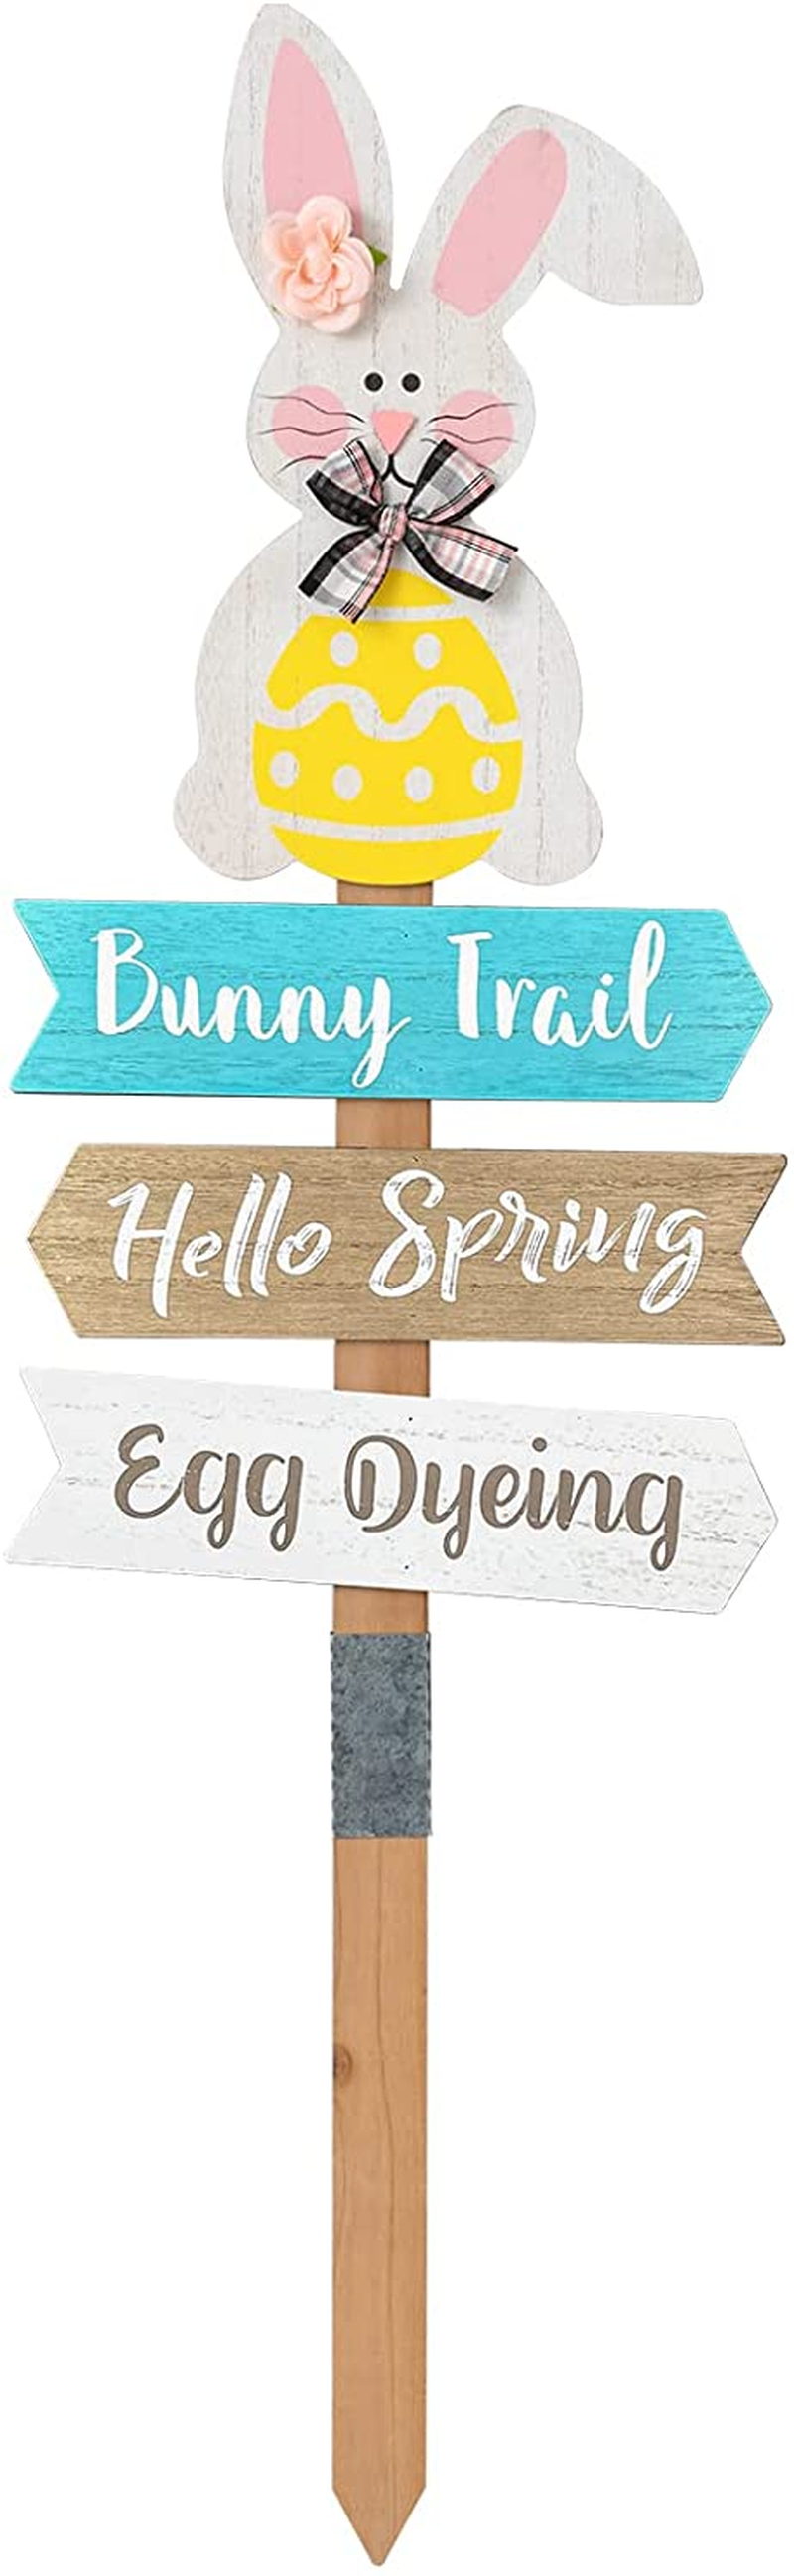 Easter Decorations Outdoor Garden Decor, Hogardeck 36 Inch Wood Decorative Garden Stake with Flower Bow Bunny Trail Stakes Spring Yard Sign Hello Spring Easter Bunny Decor for Indoor Outdoor Patio Lawn